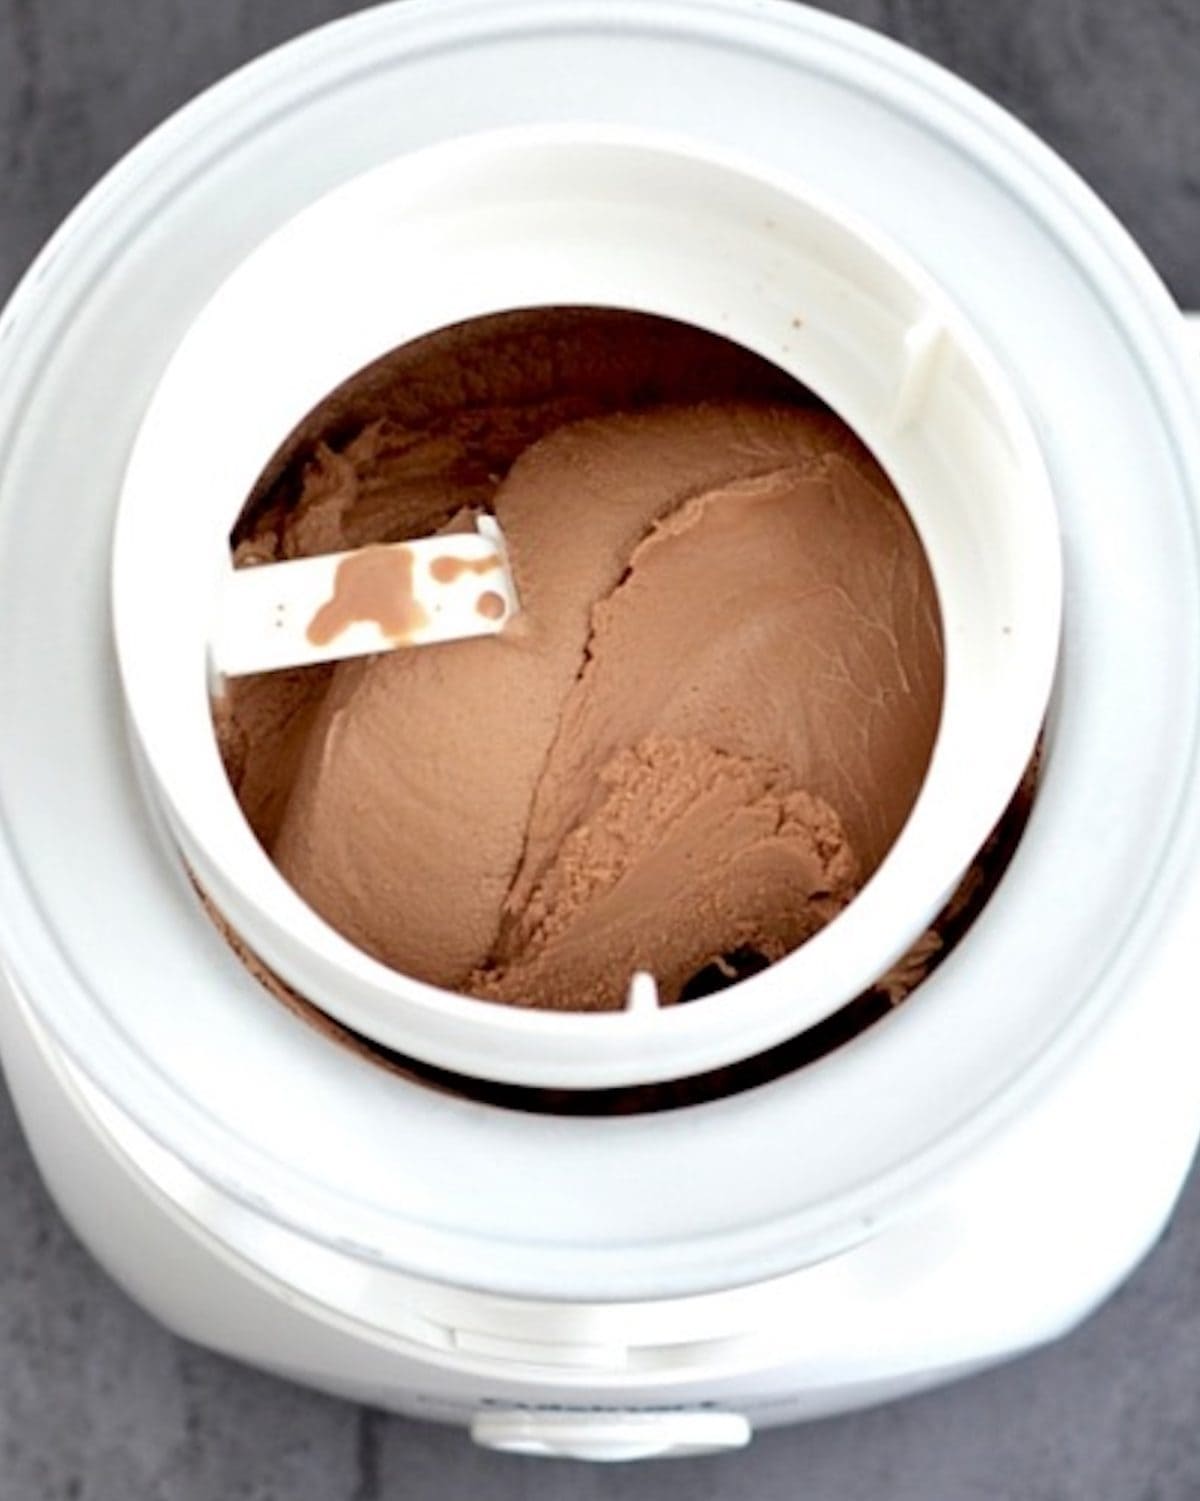 Dairy Free Chocolate Peanut Butter Ice Cream churned in an ice cream maker